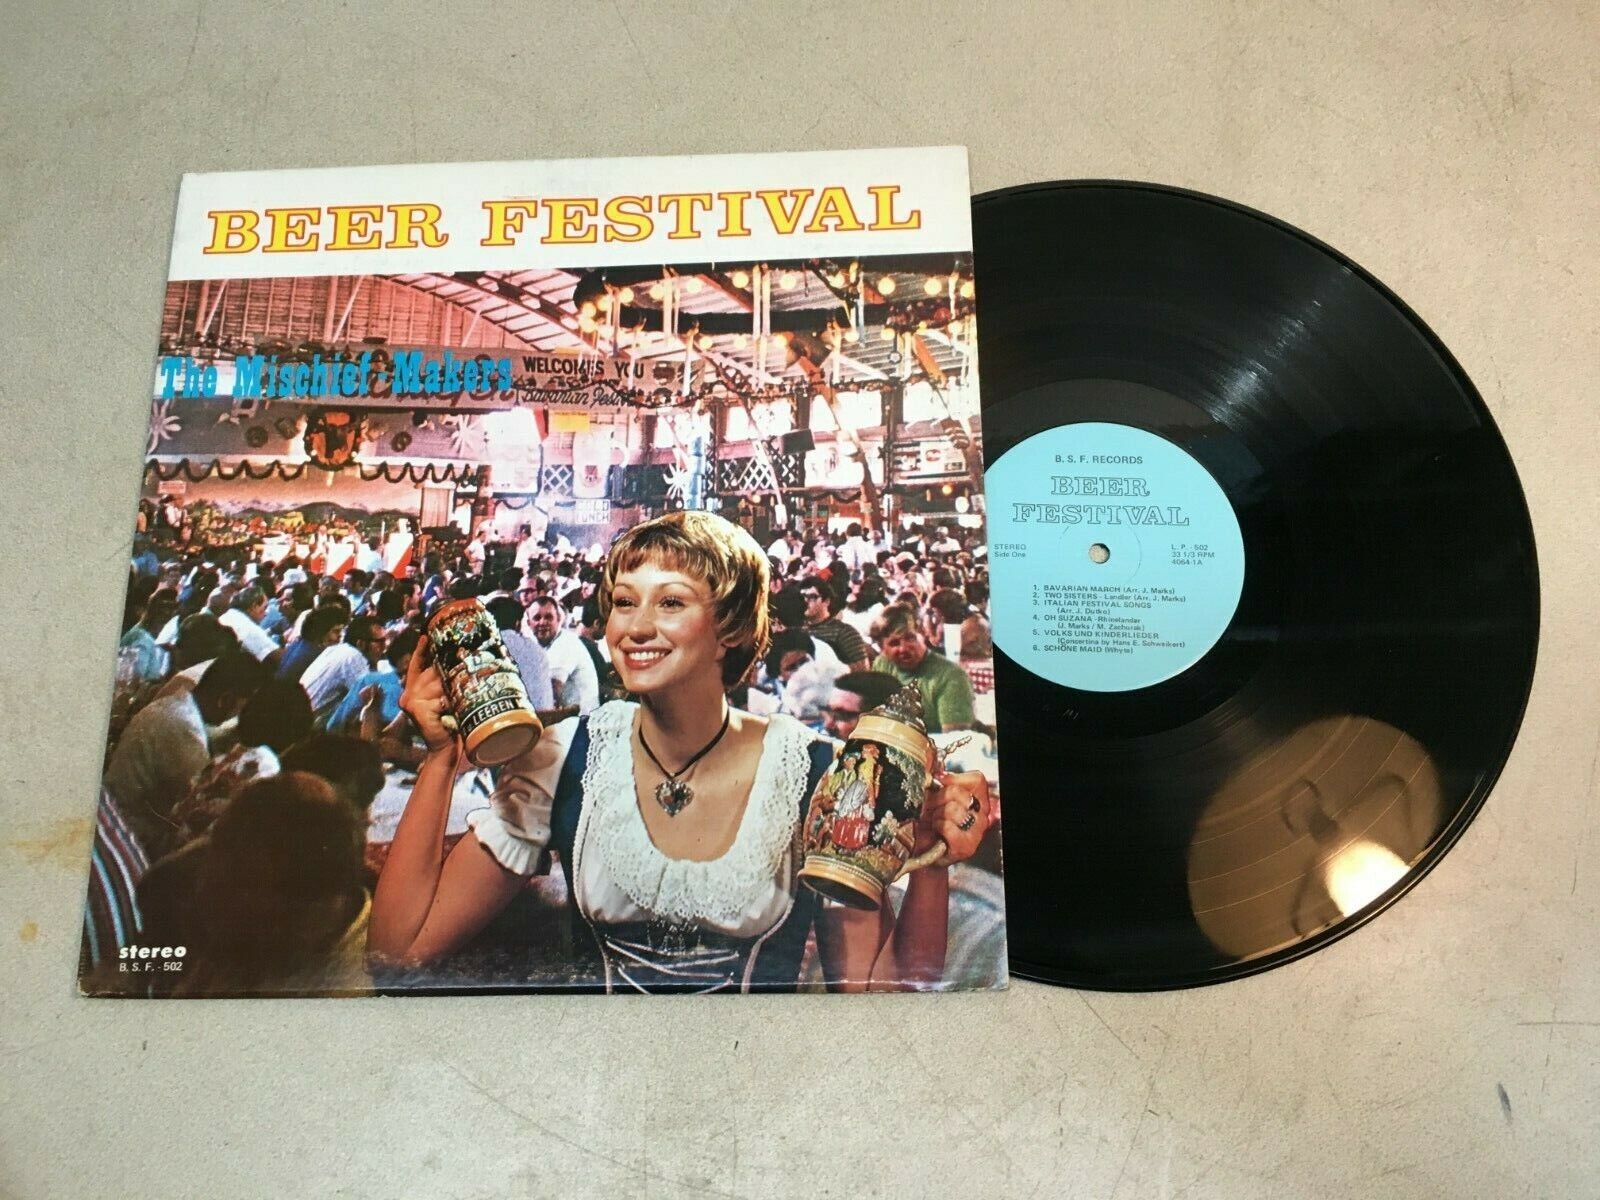 Vintage Beer Festival Record The Mischief Makers Beer Drinking Folk Songs